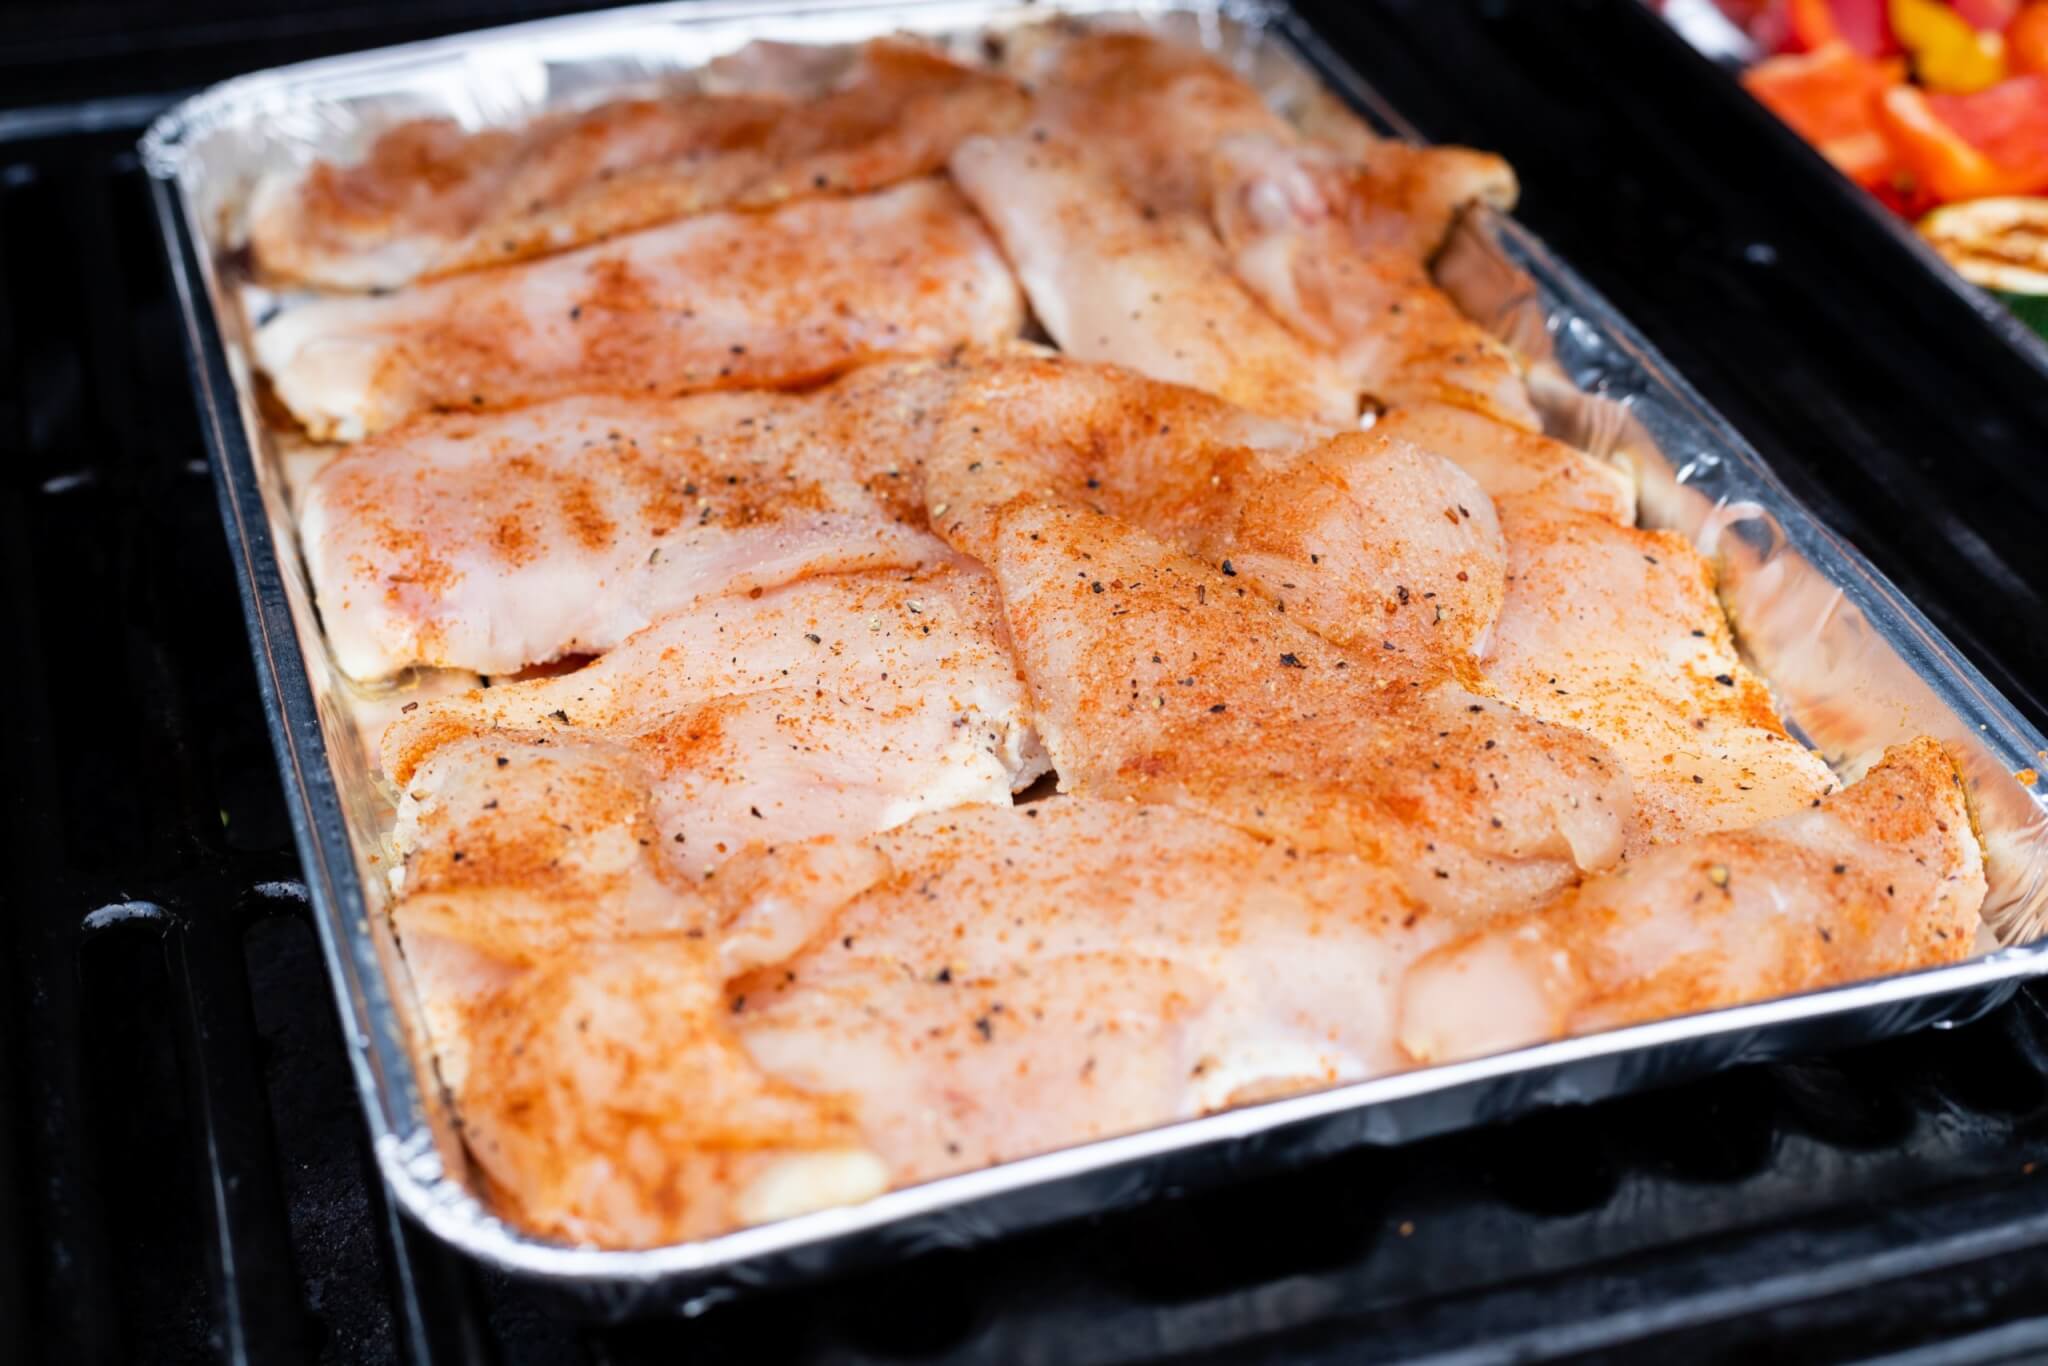 Chicken breasts prepared for cooking in the oven